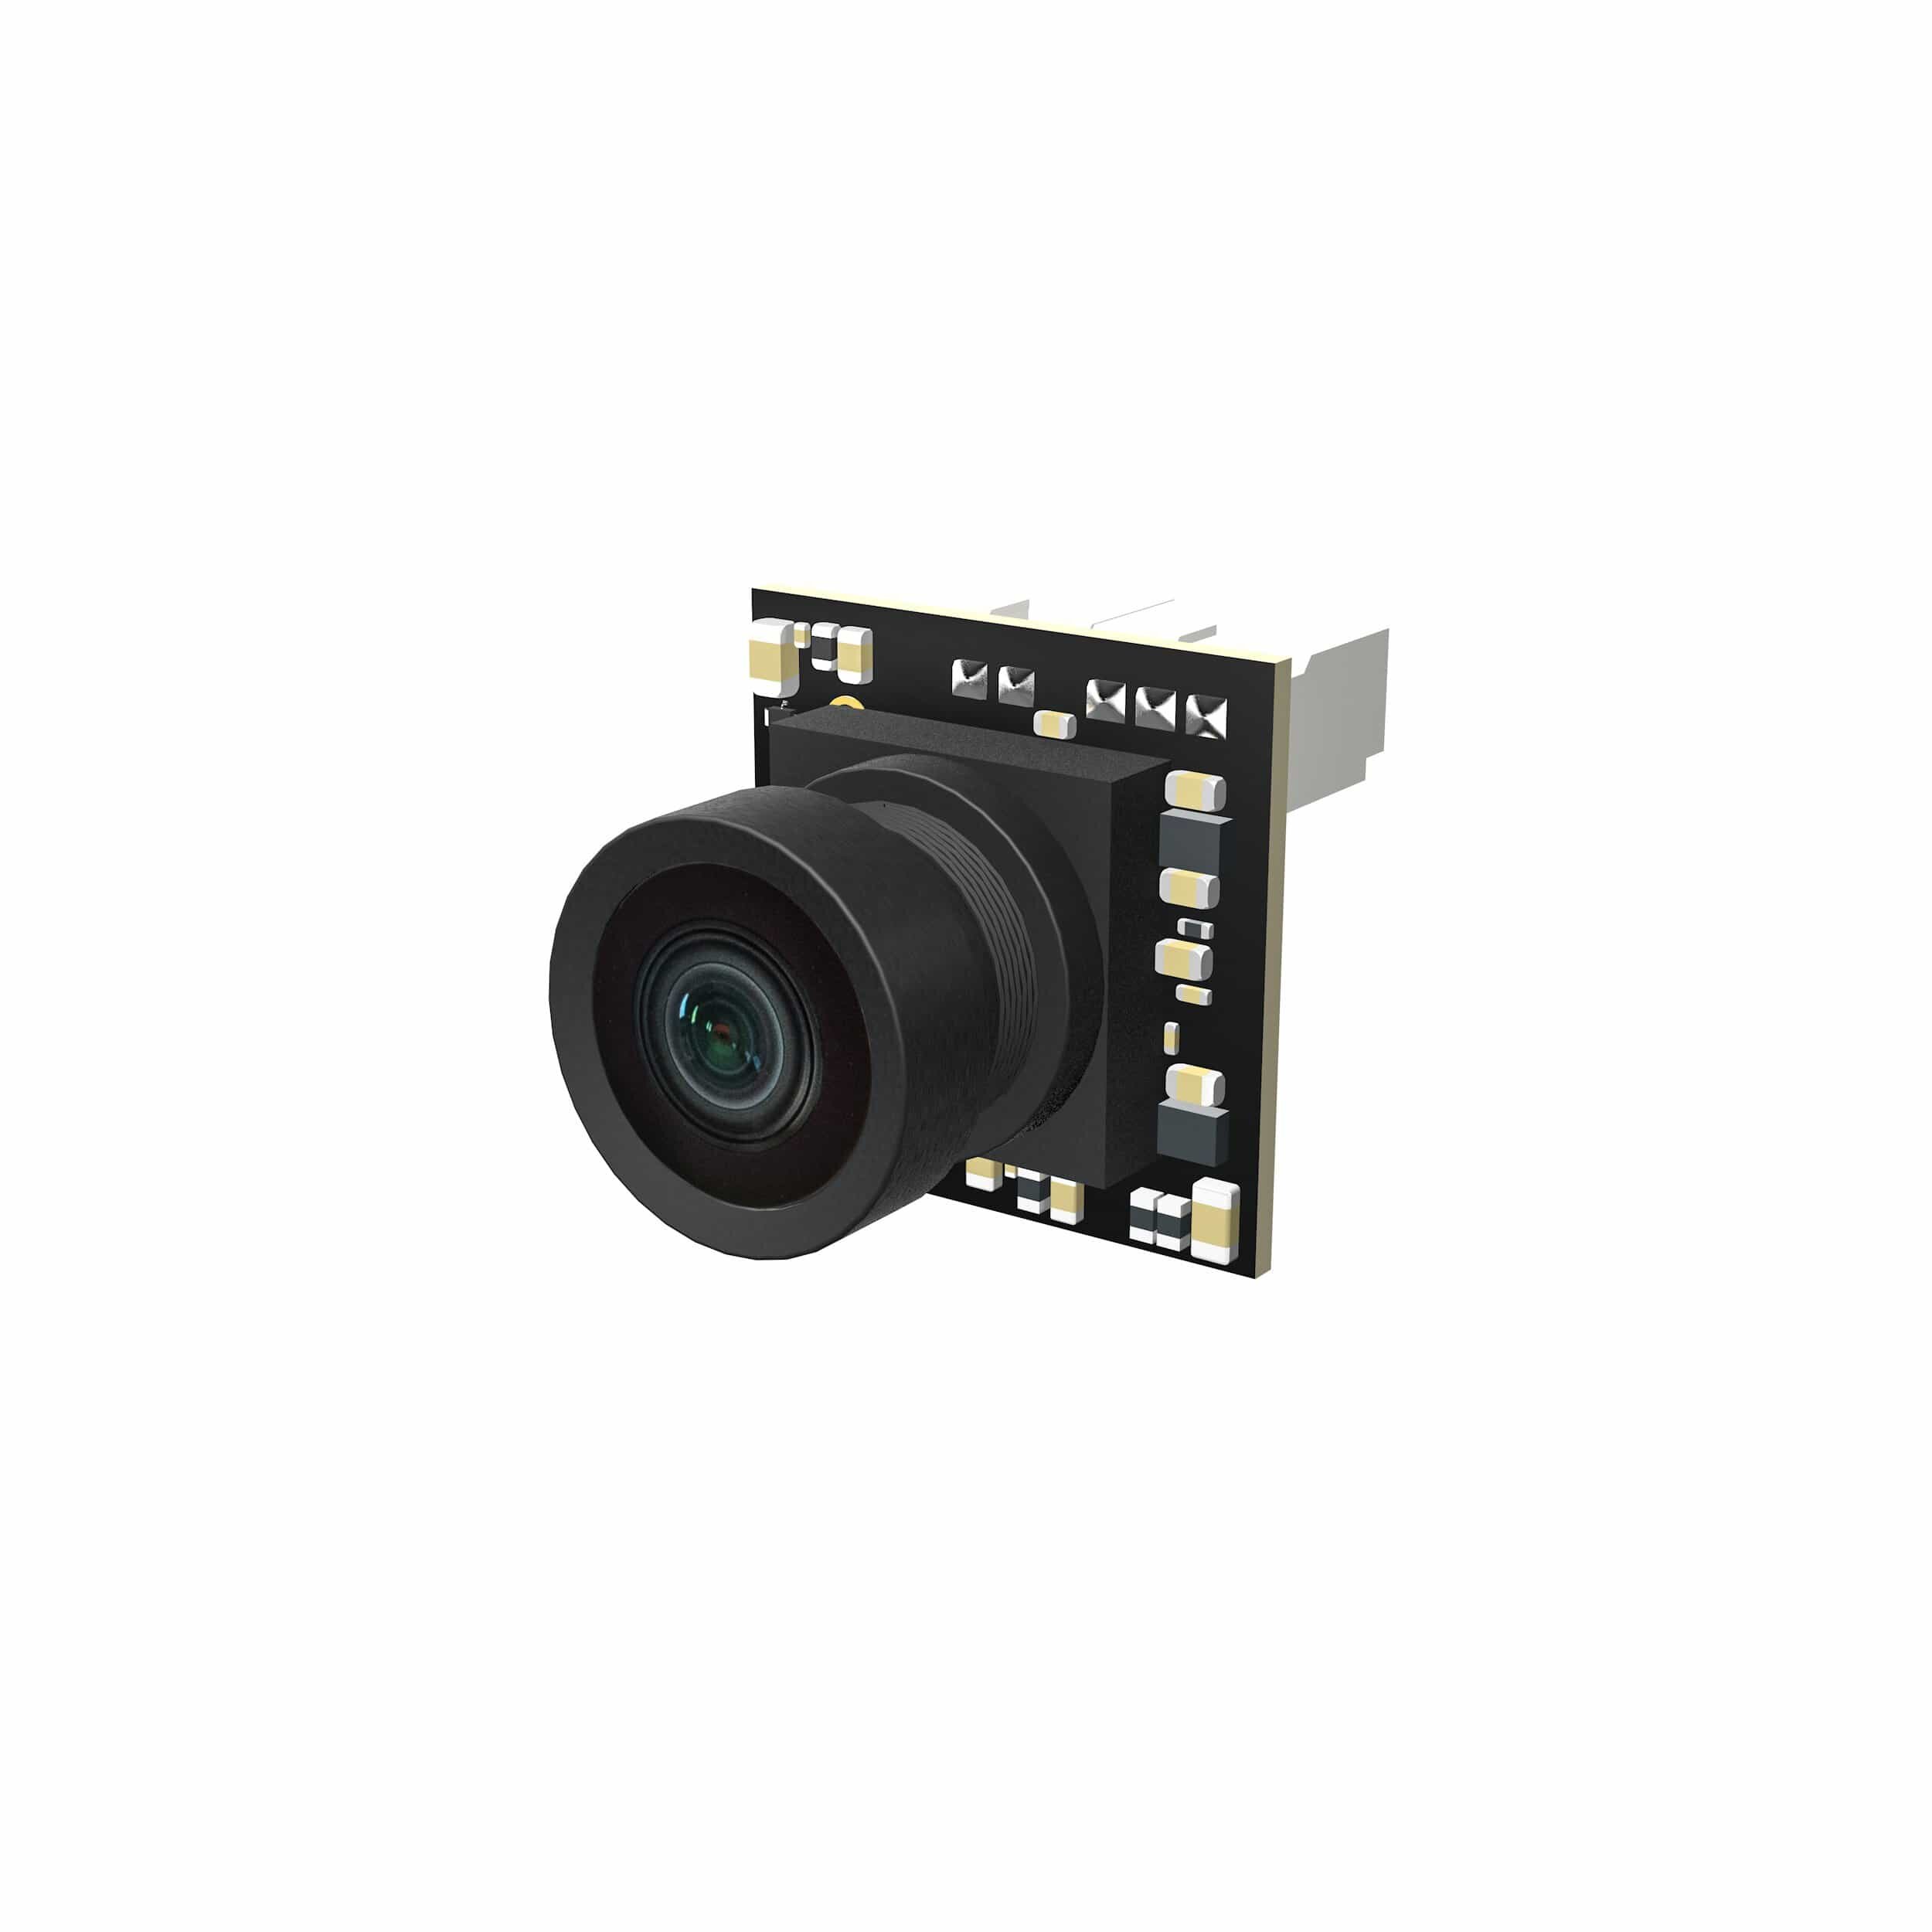 Caddx Ant Lite 1/3'' CMOS 1.8mm 1200TVL 16:9 PAL/NTSC Global WDR FOV 165° FPV Camera FPVCycle Edition for FPV Racing RC